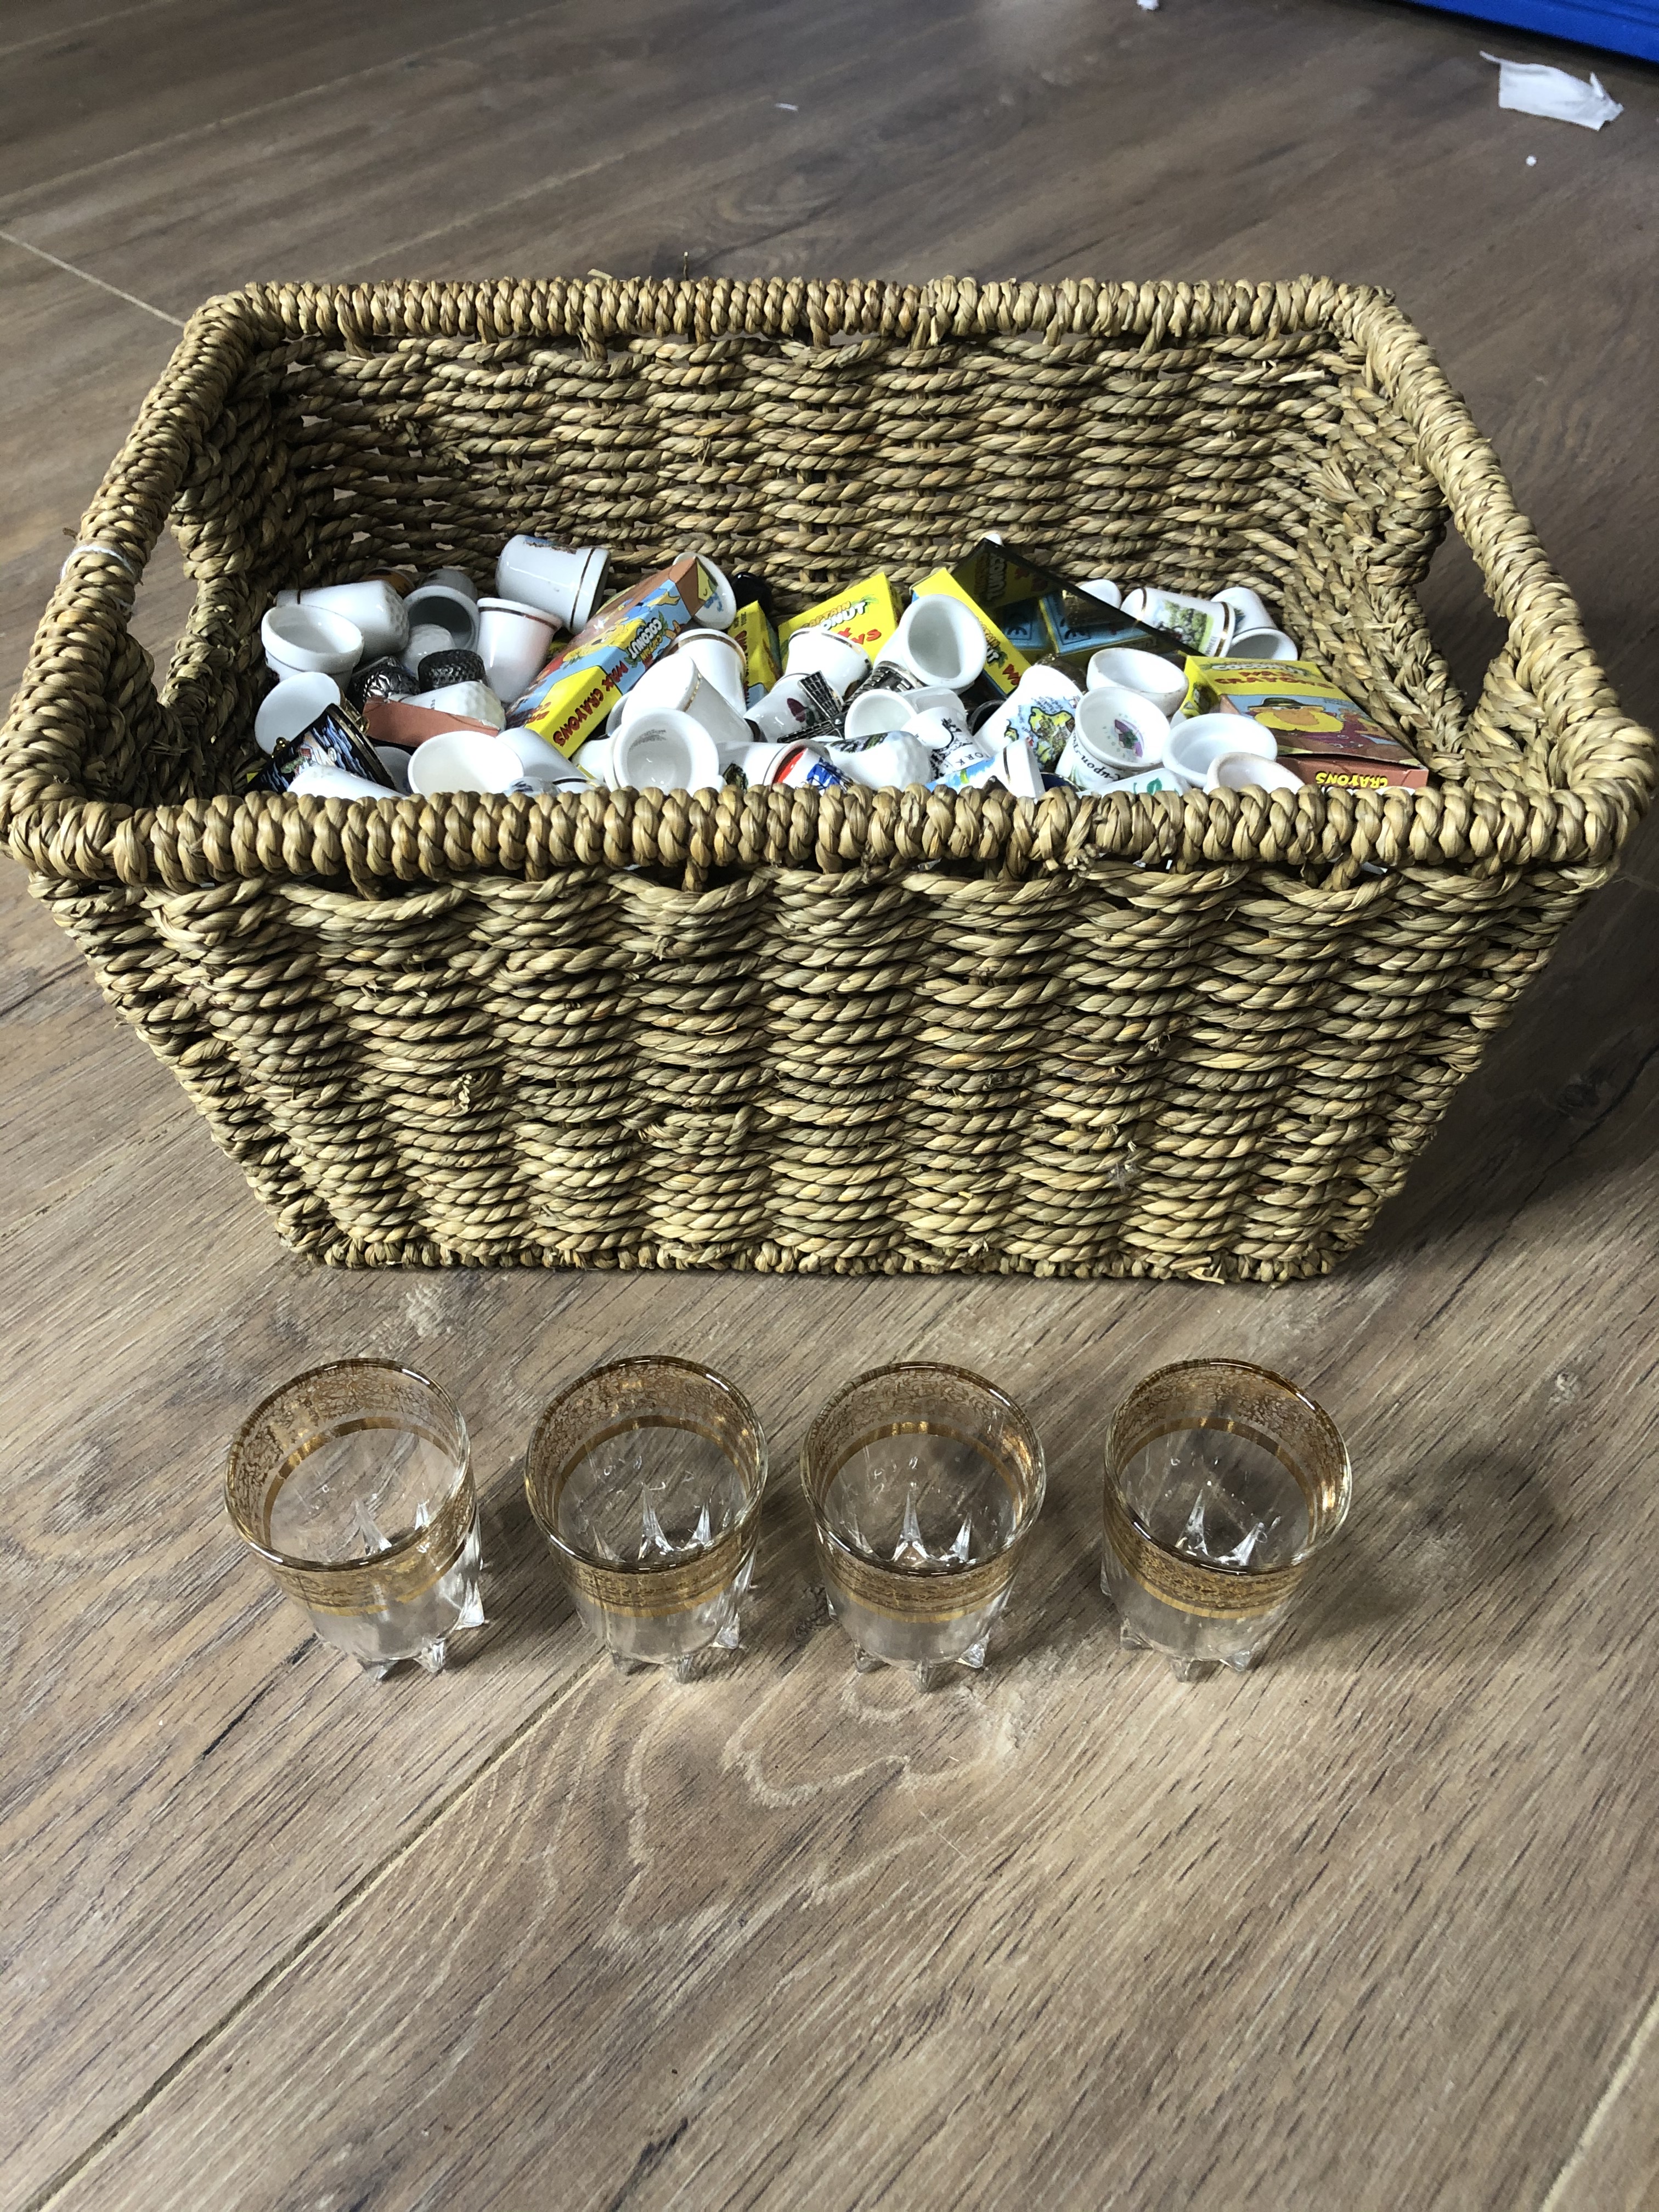 A WICKER BASKET CONTAINING A LARGE AMOUNT OF THIMBLES AND MATCHES